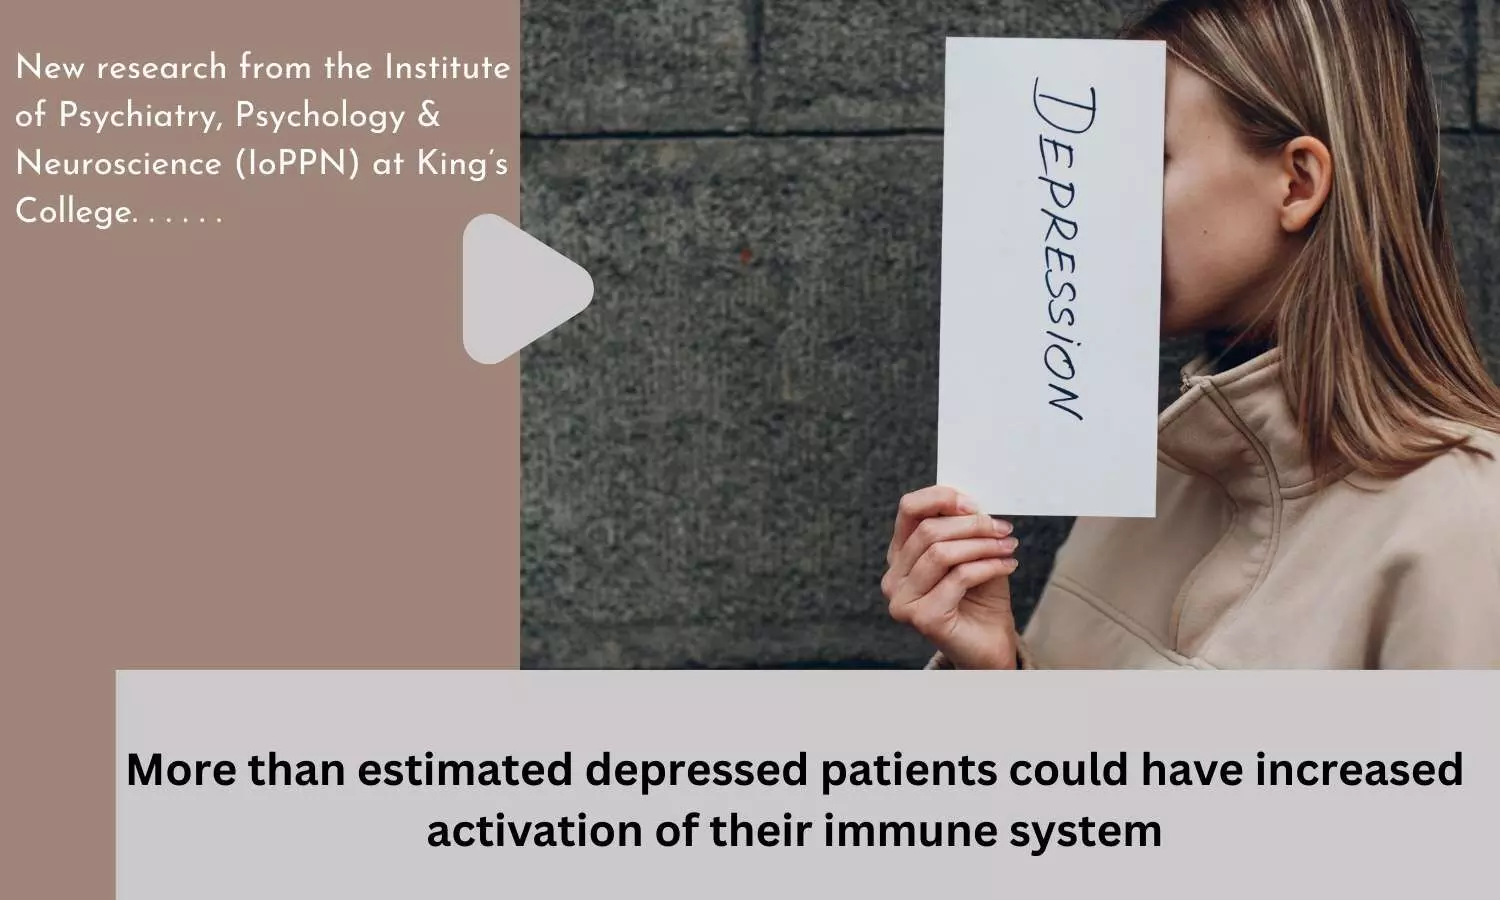 More than estimated depressed patients could have increased activation of their immune system